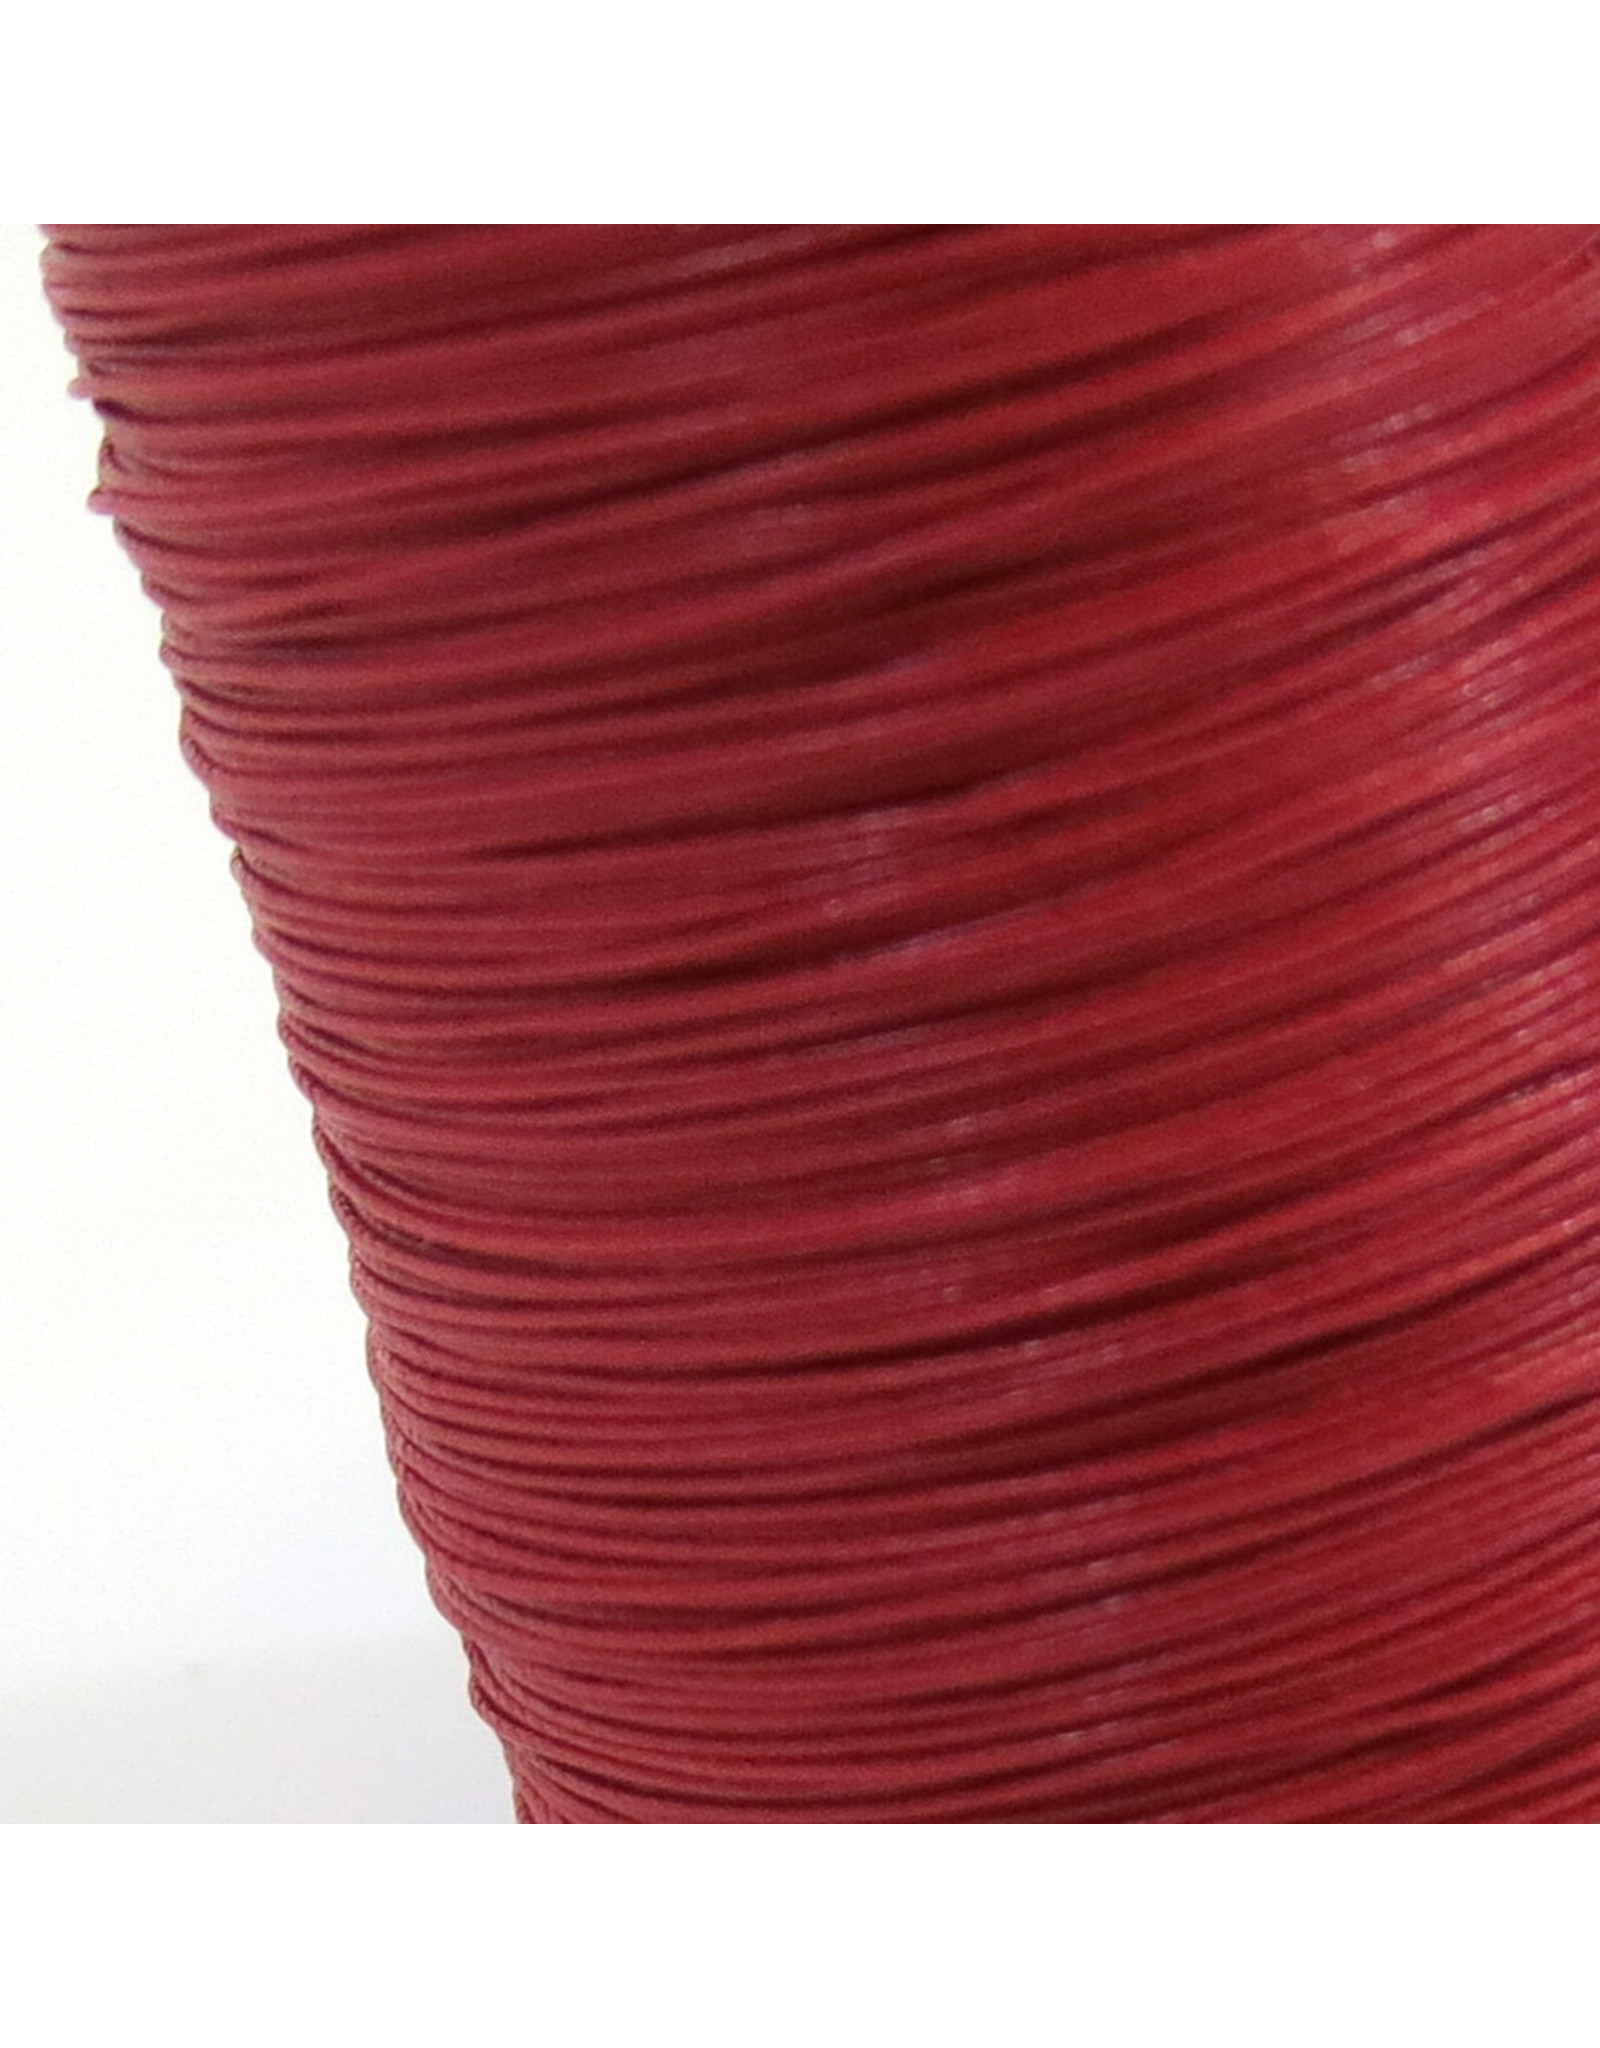 Hand sewing thread Red